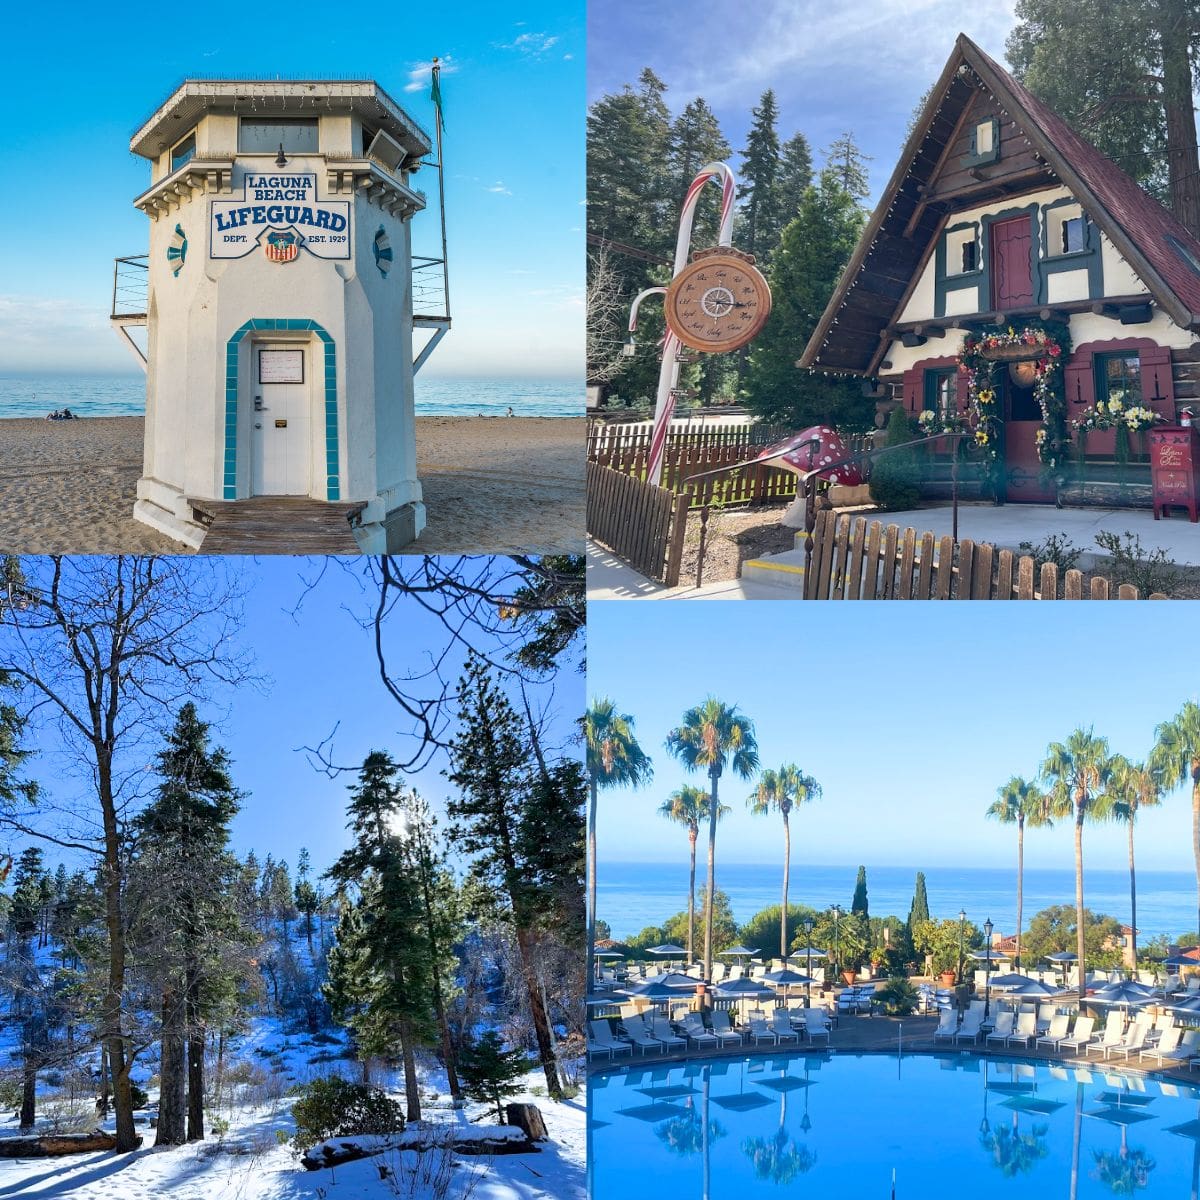 Southern California Winter Vacation Ideas